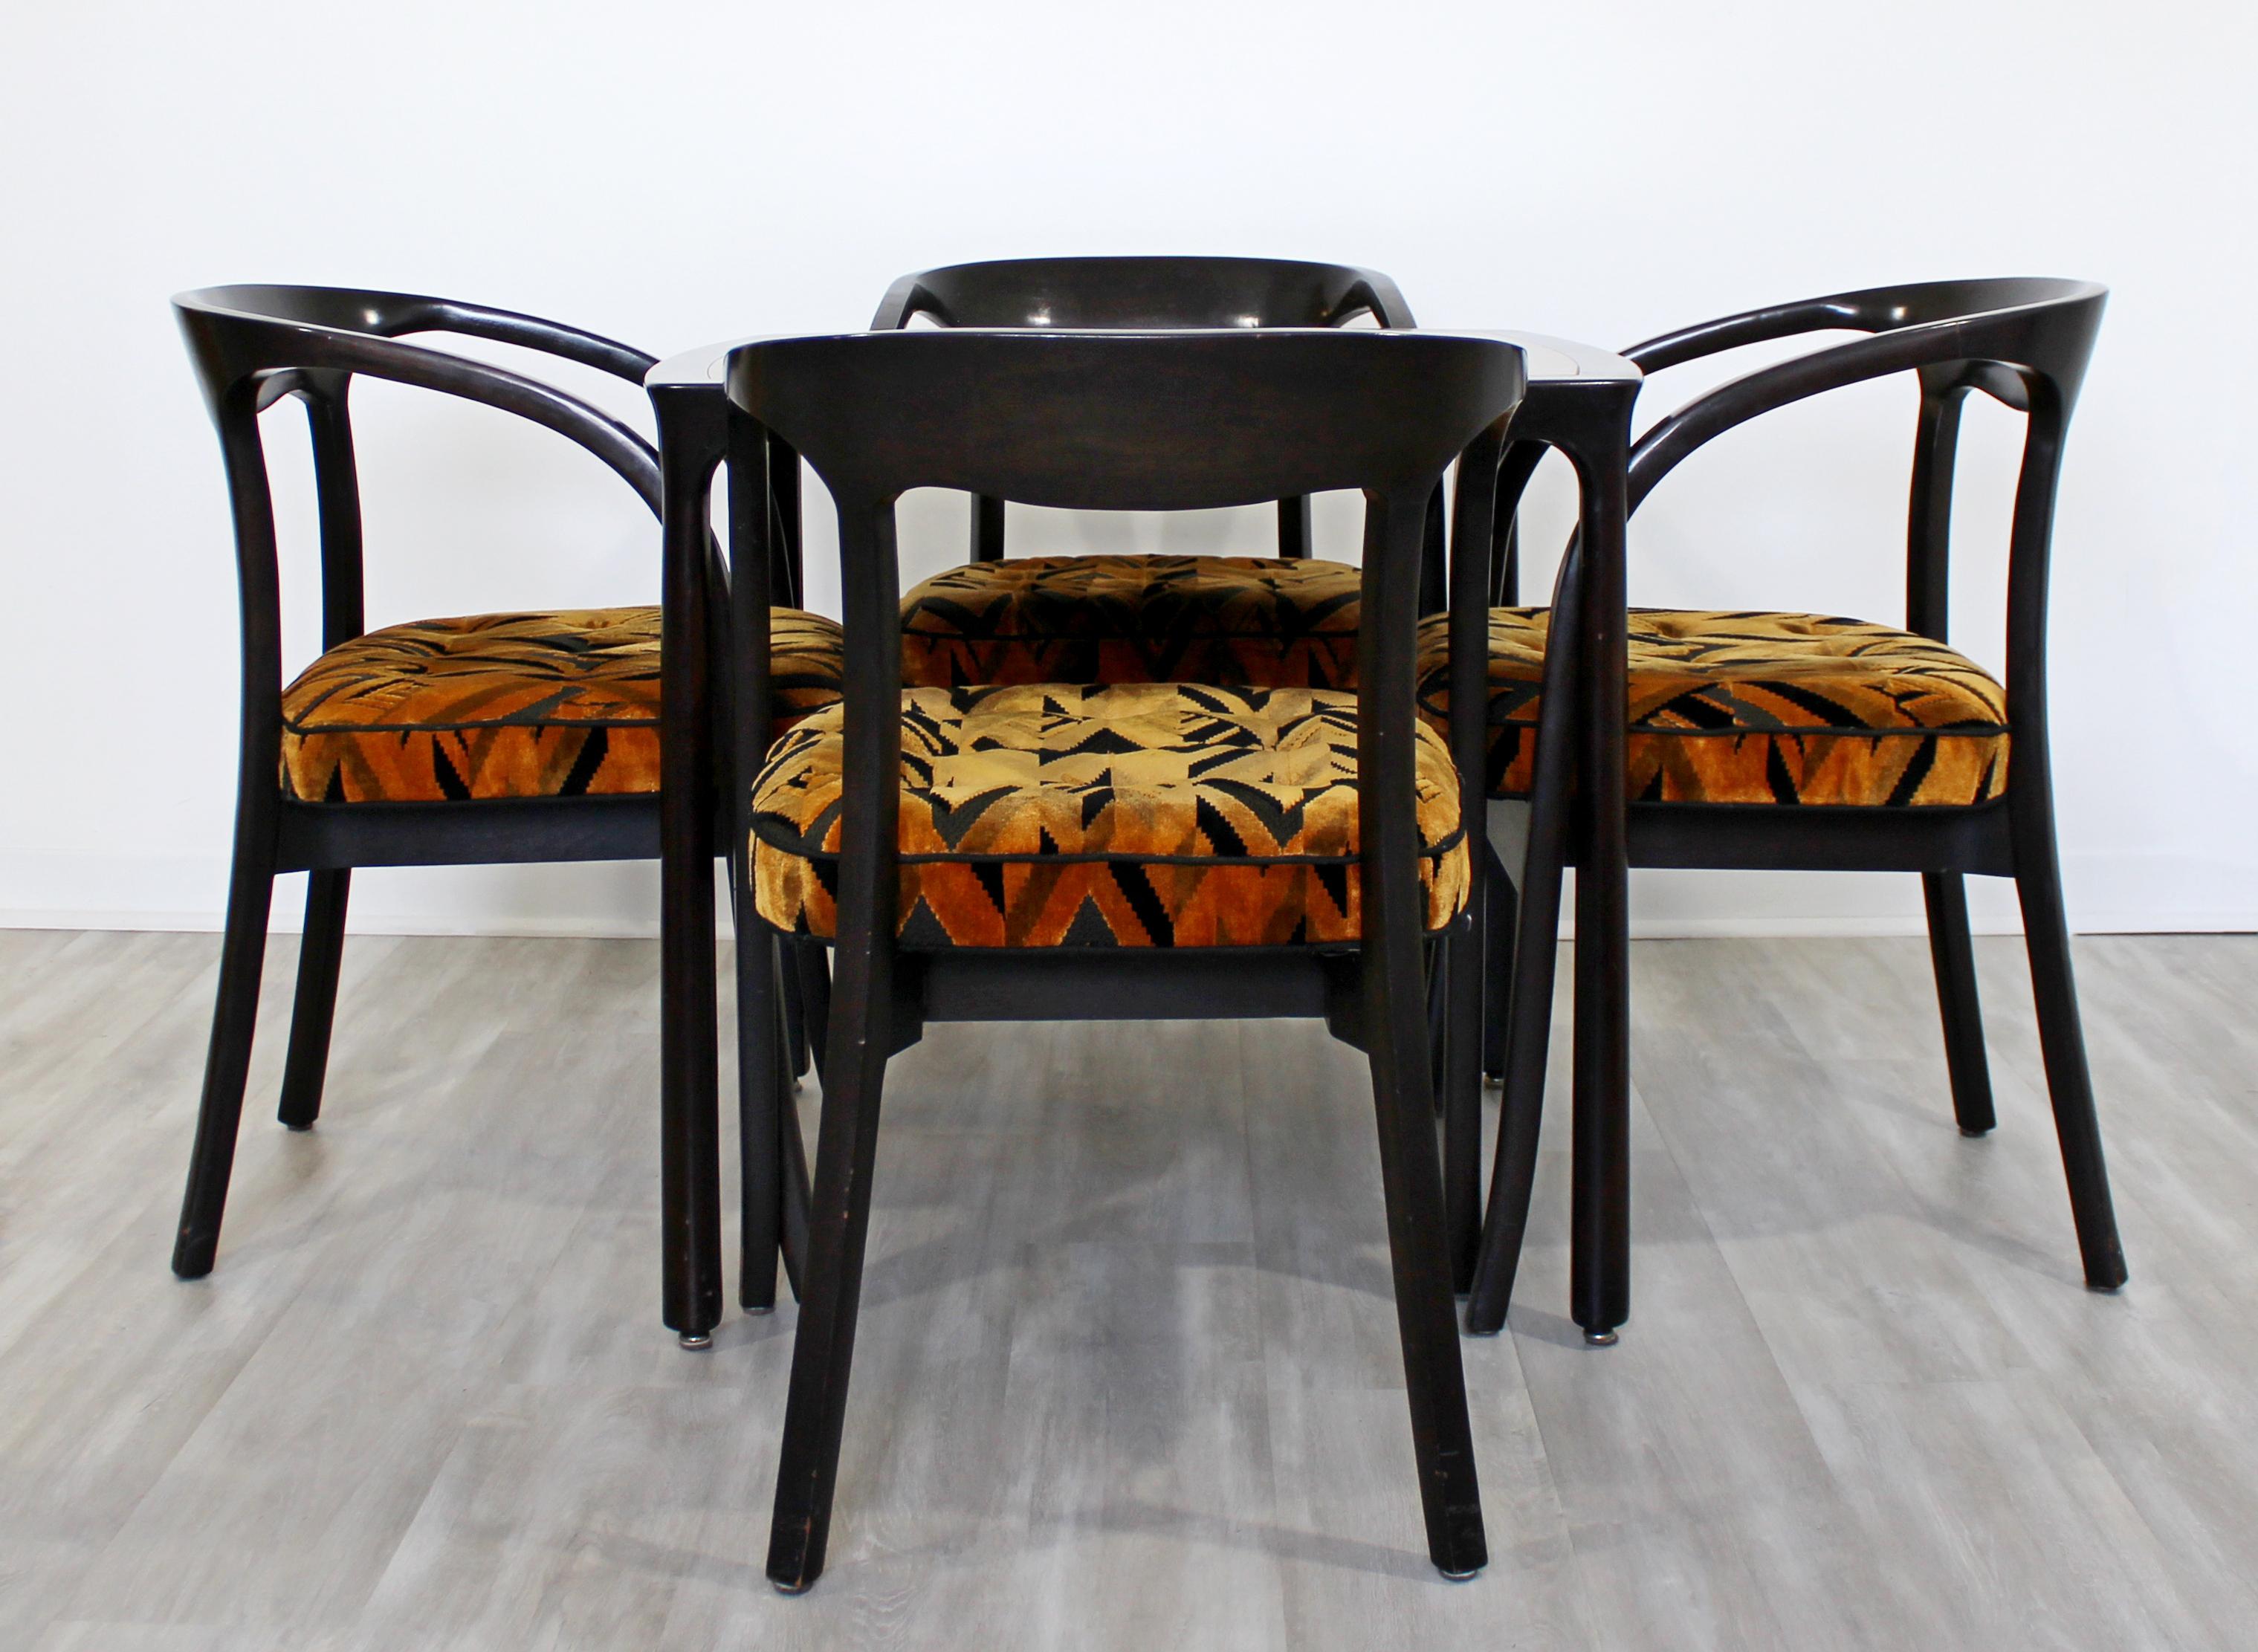 For your consideration is an extravagant game or dinette set, including a mahogany and rosewood table and four matching armchairs, by Edward Wormley for Dunbar, circa 1970s. The upholstery is Tressard very reminiscent of Jack Lenor Larsen. Cushions